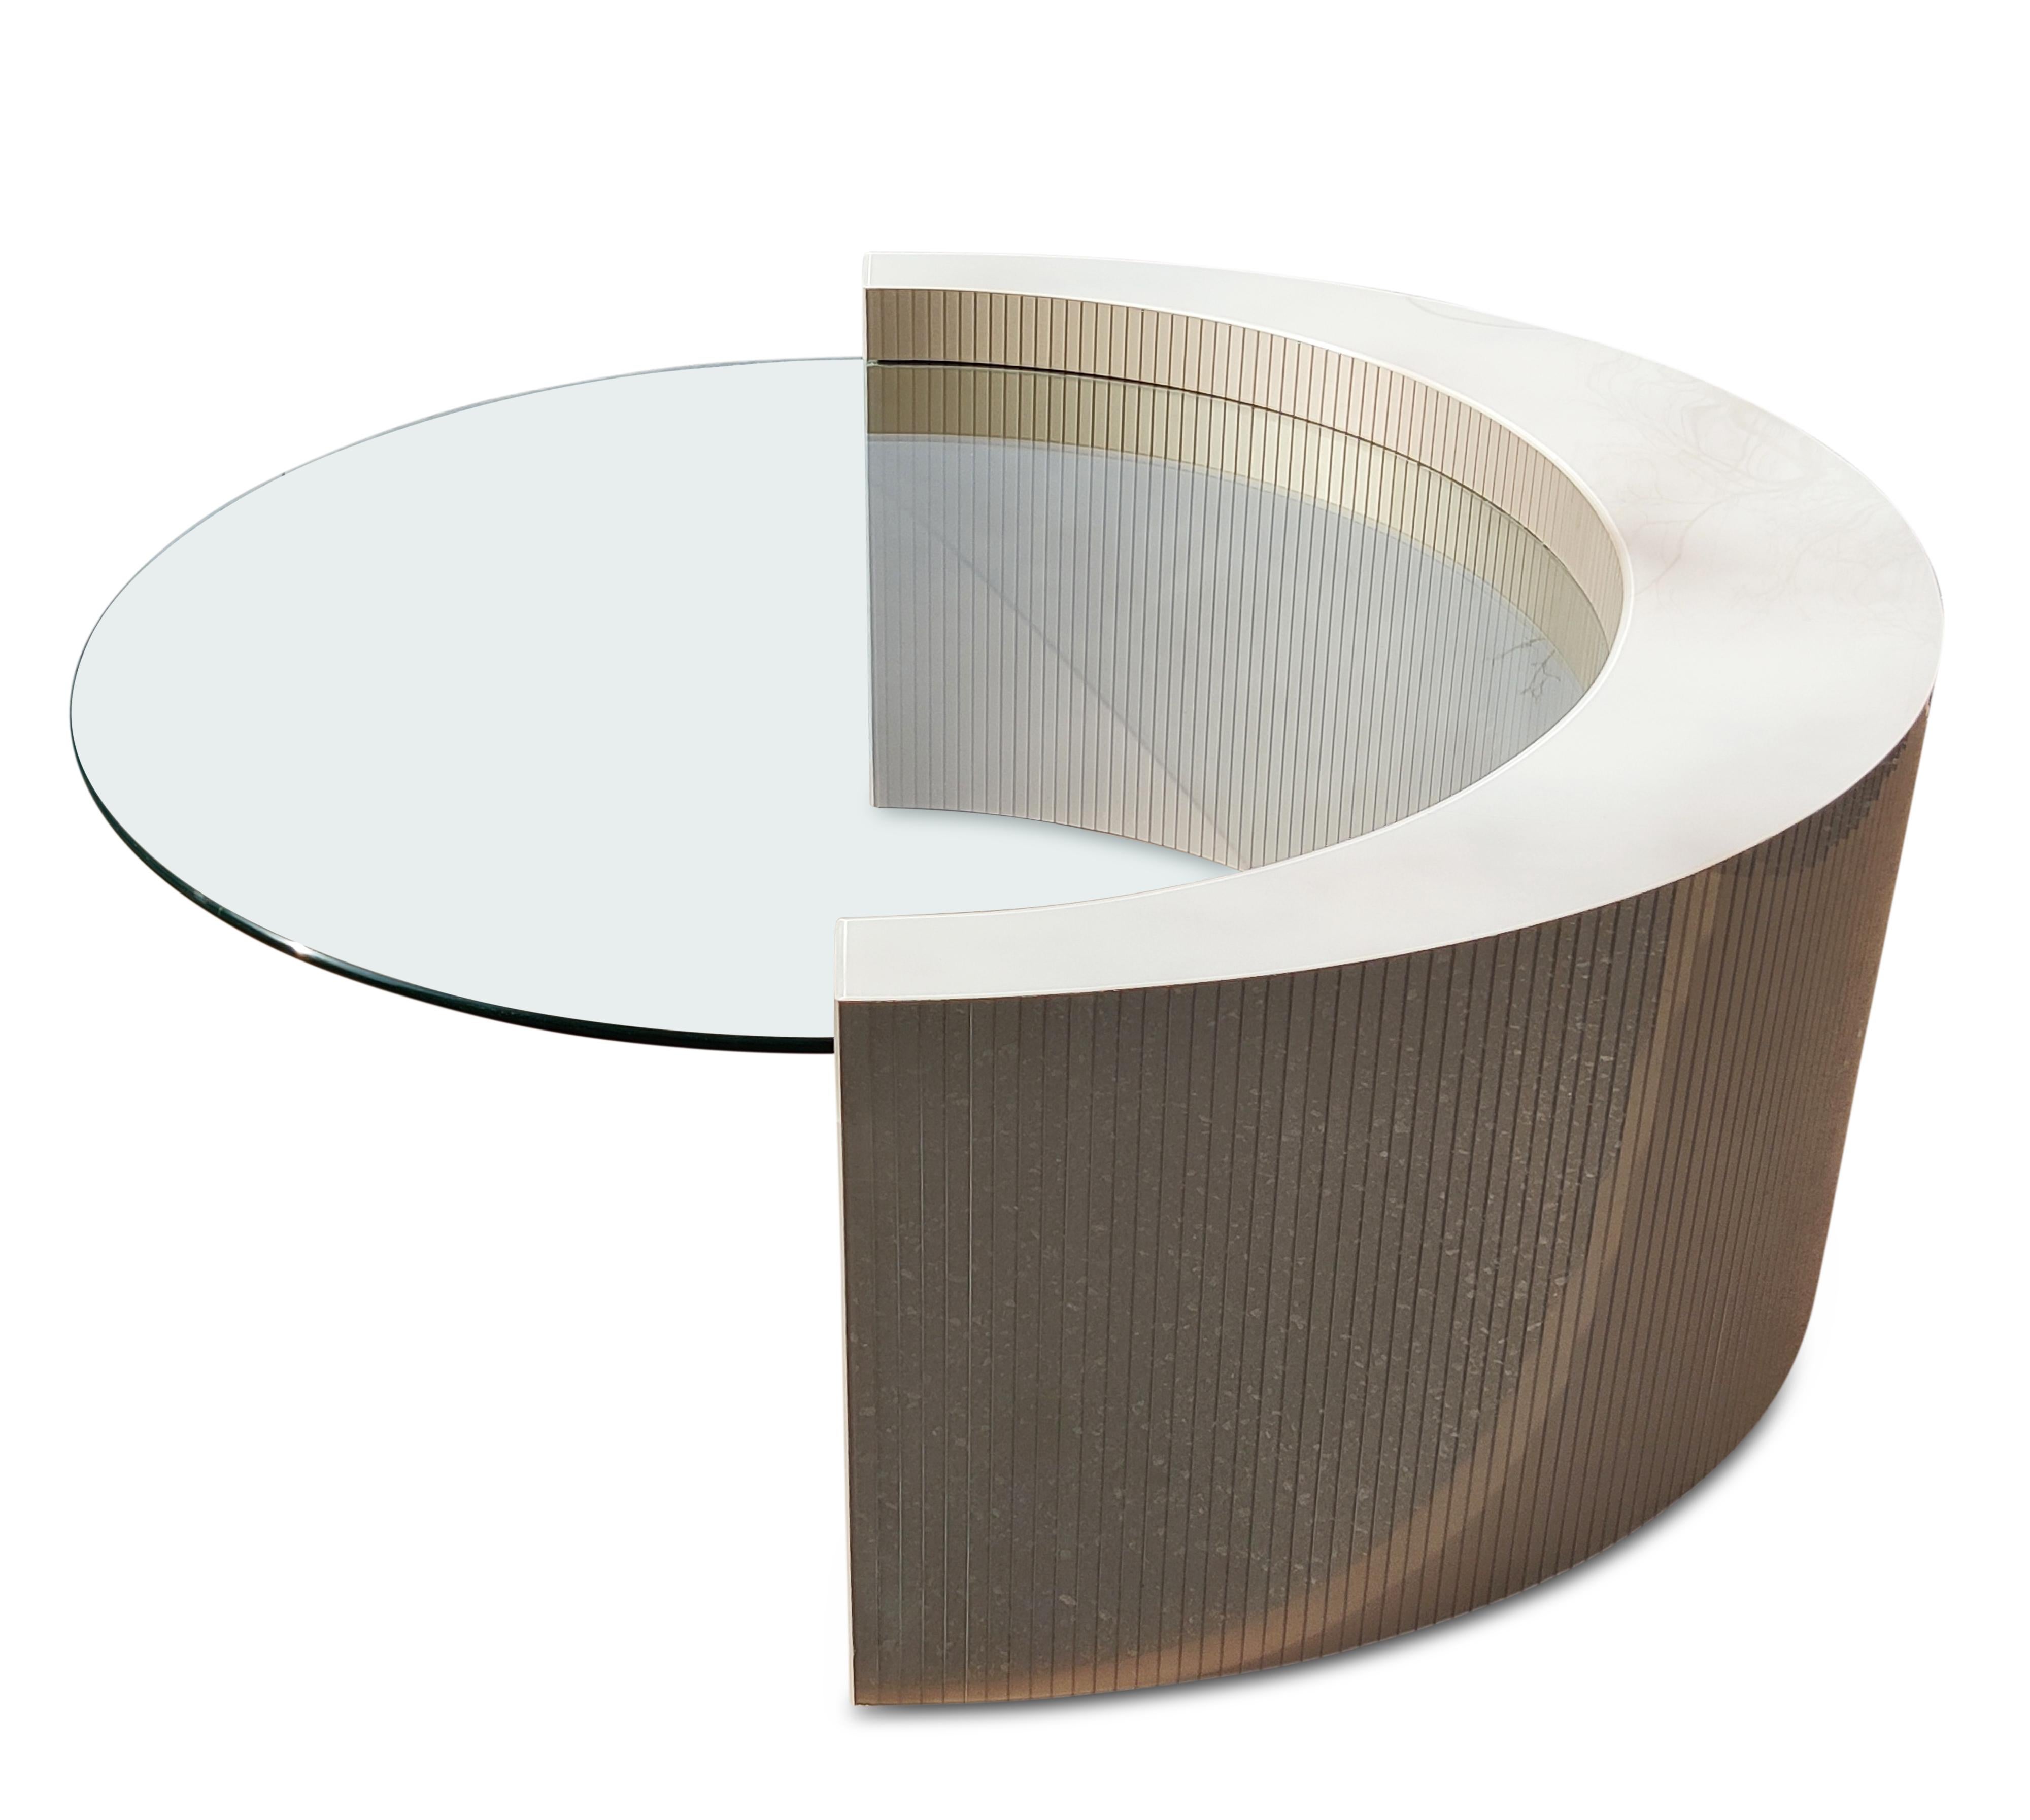 This beautiful coffee table has unique construction. Shaped like a crescent, it has a curved wood frame overlaid with elegant gray acrylic strips. About 3 inches below the top of the crescent, there is a slot in the base which houses a removable